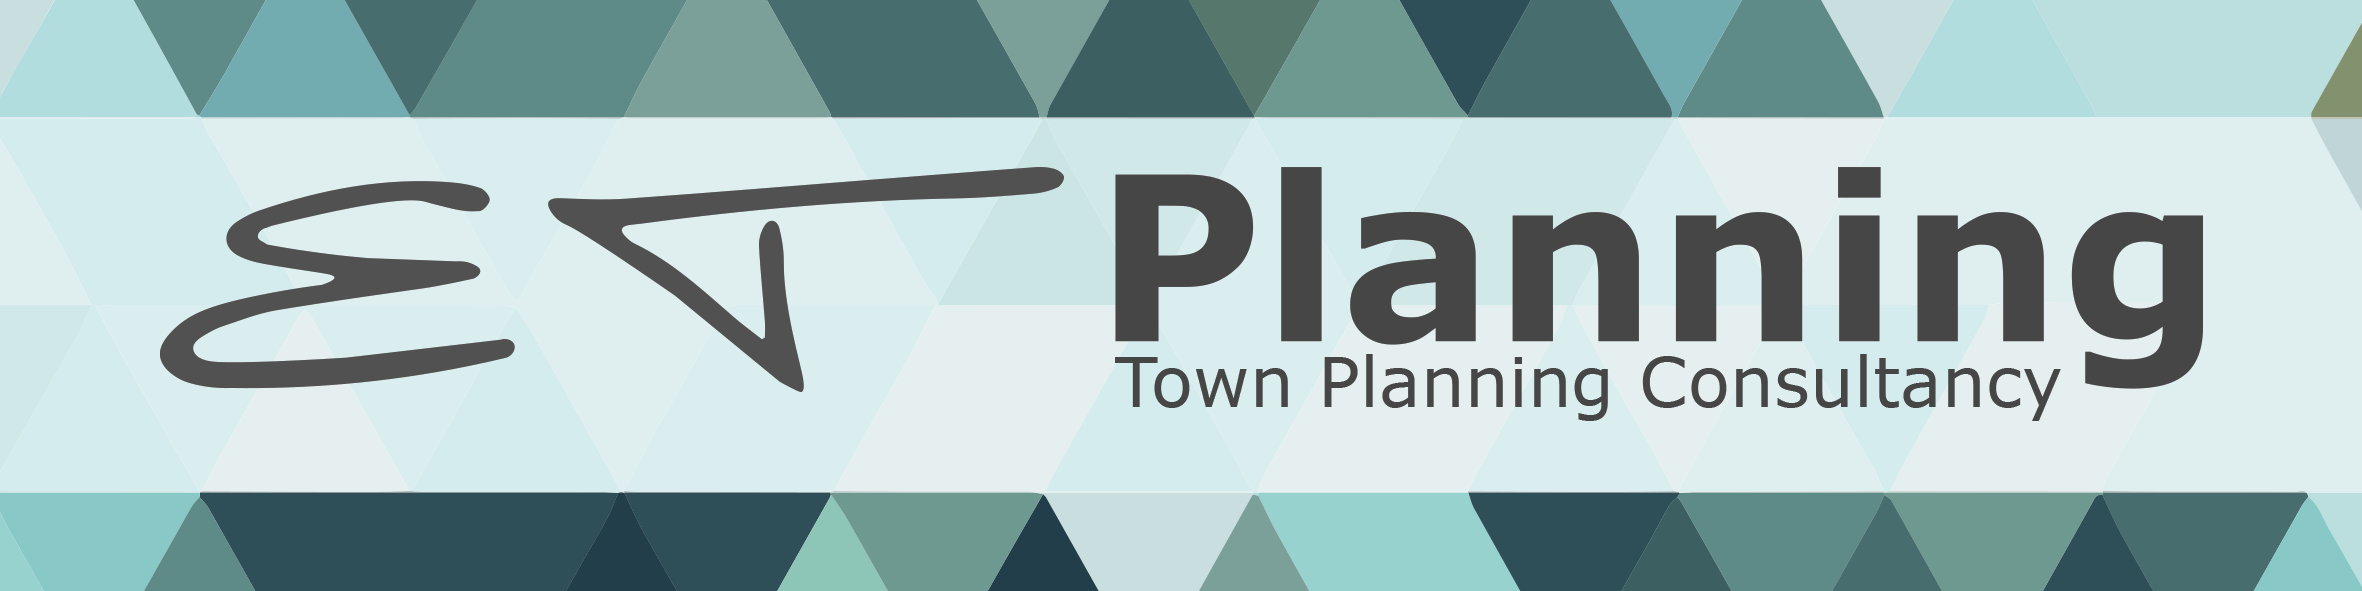 DM9 Logo - Policy DM9. ETPlanning Town Planning Consultant